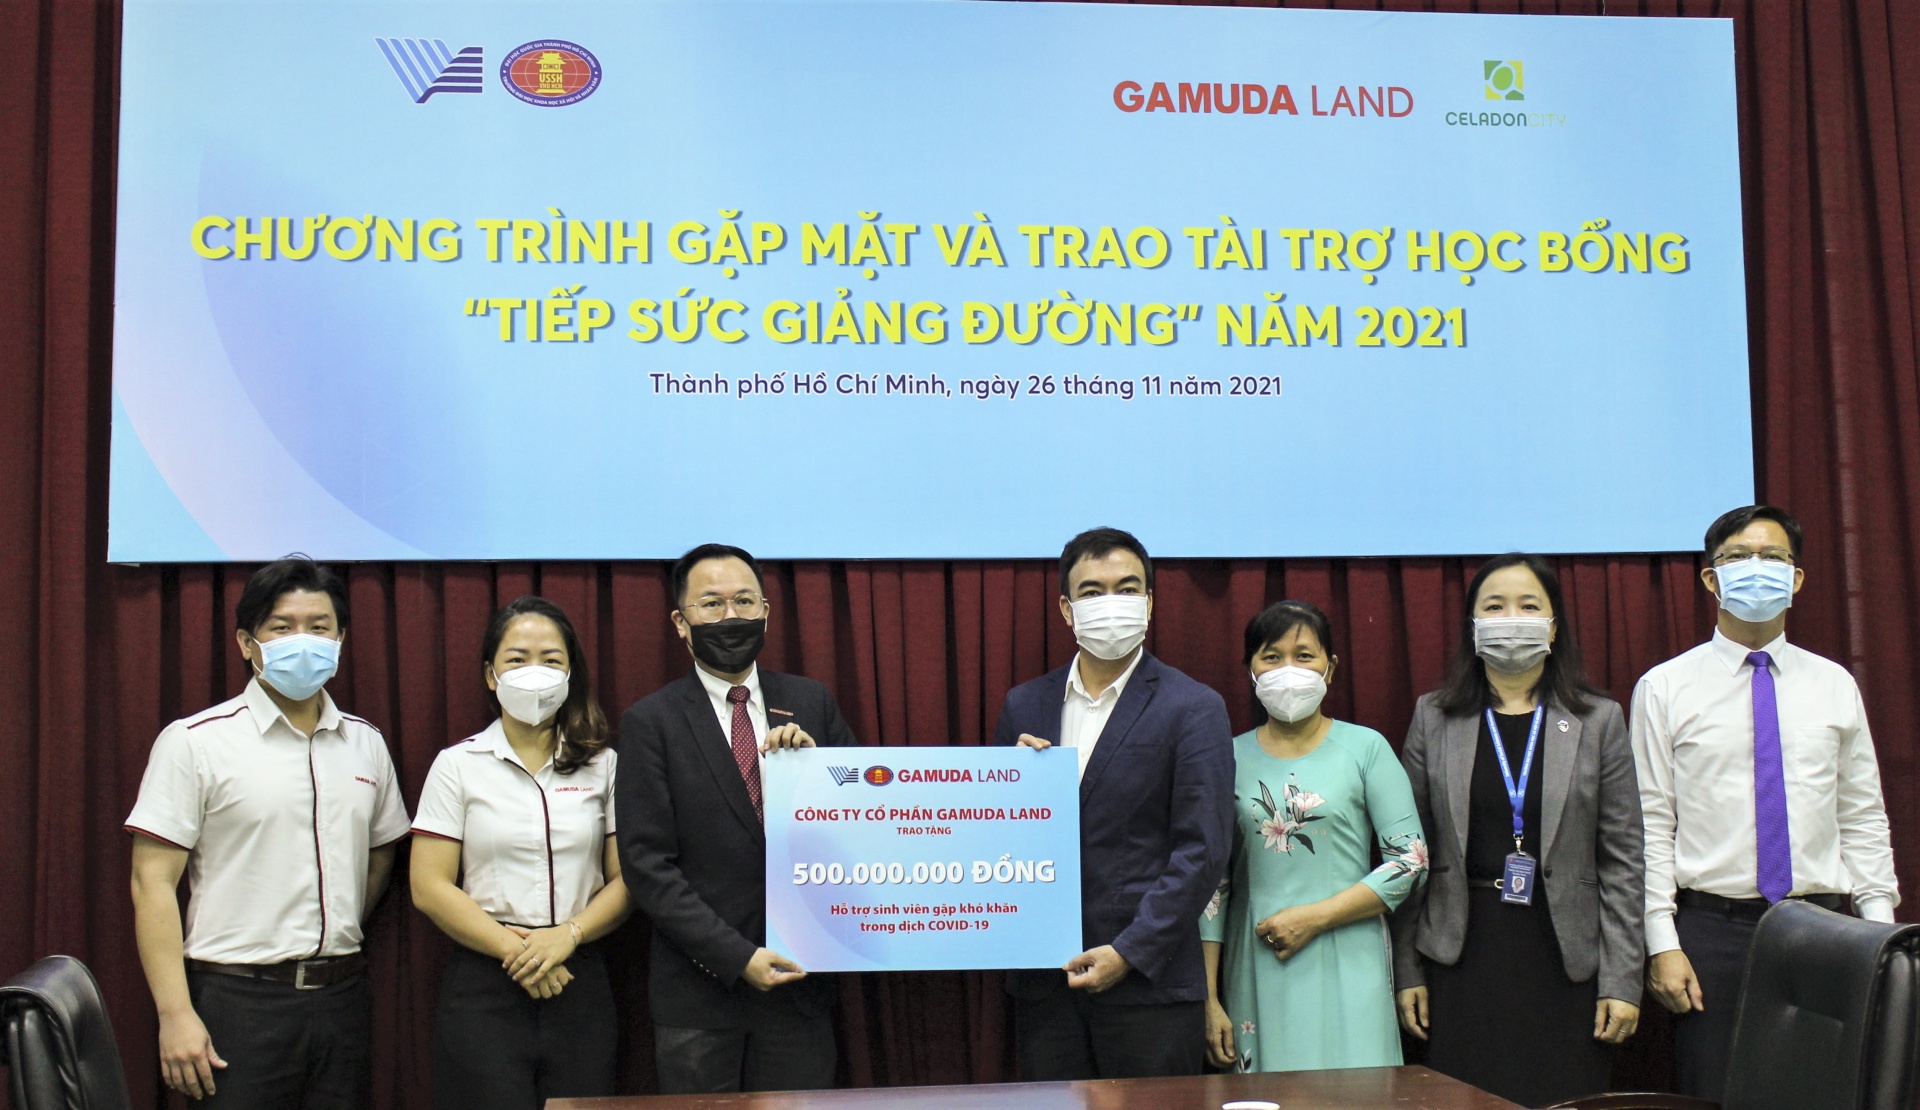 Gamuda Land grants "Back to School" scholarships to support disadvantaged students